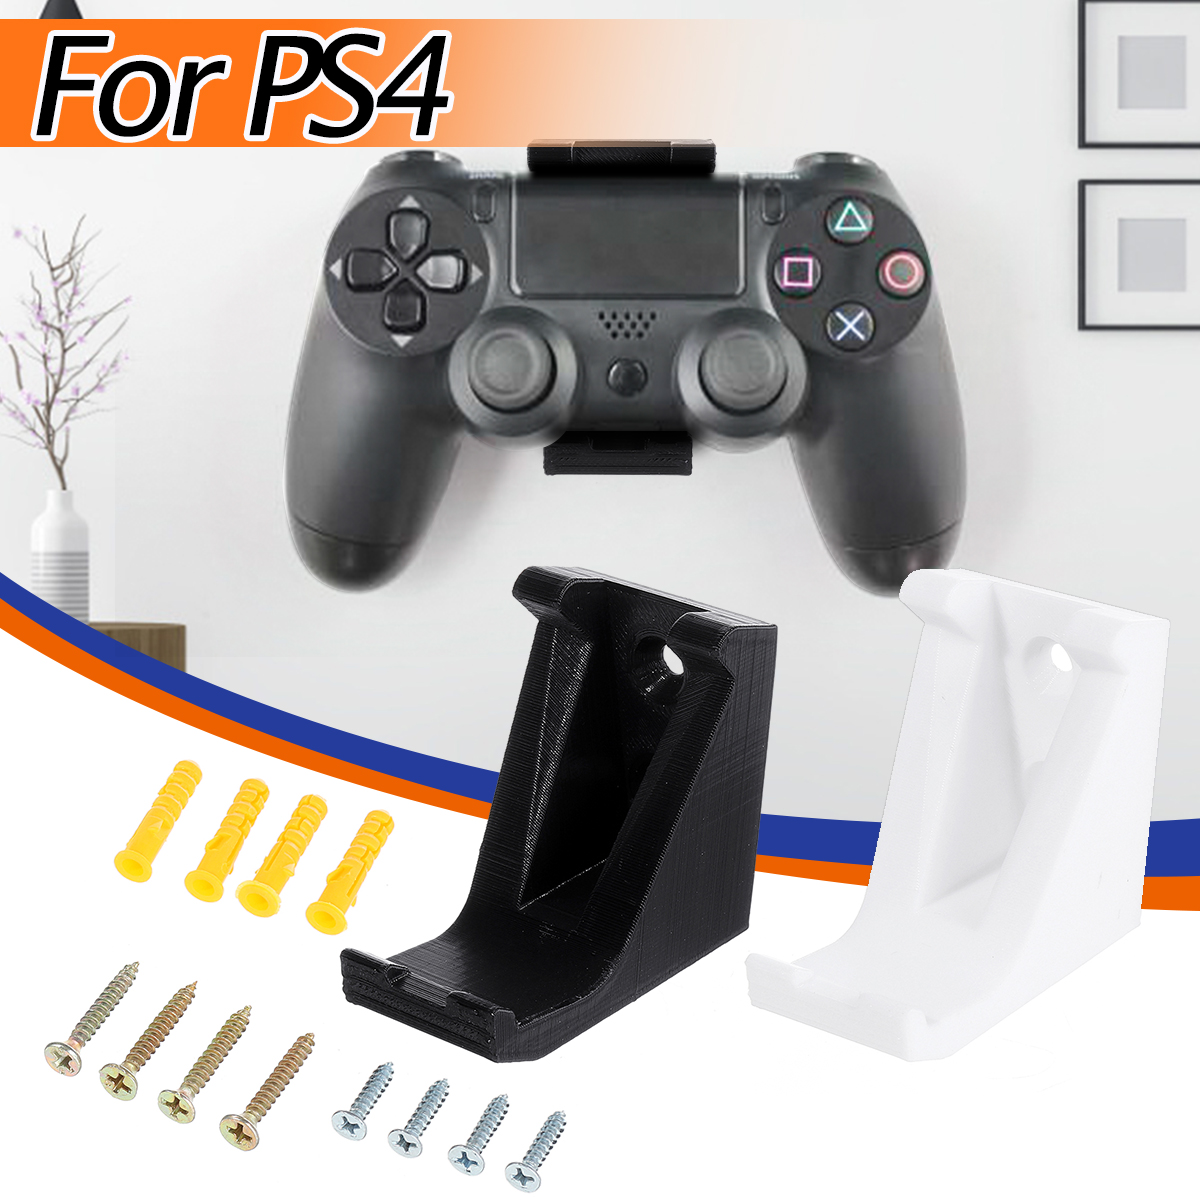 Wall Holder Dock Gamepad Stand Screws for Playstation 4 PS4 Game Controller 12